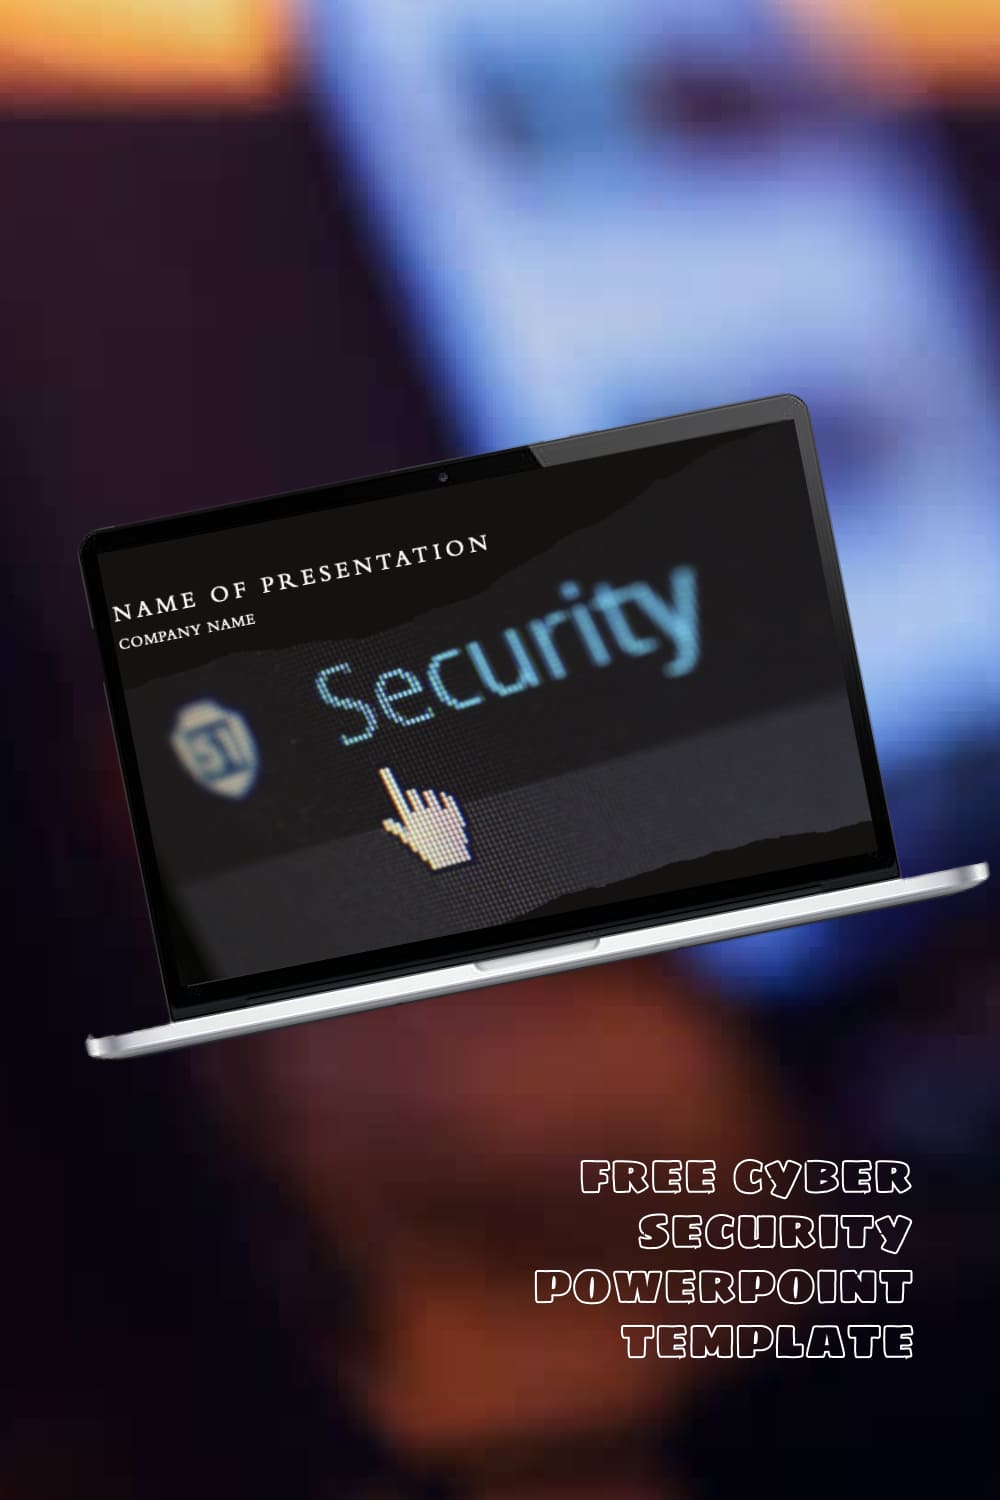 Free Cyber Security Powerpoint Template Pinterest.